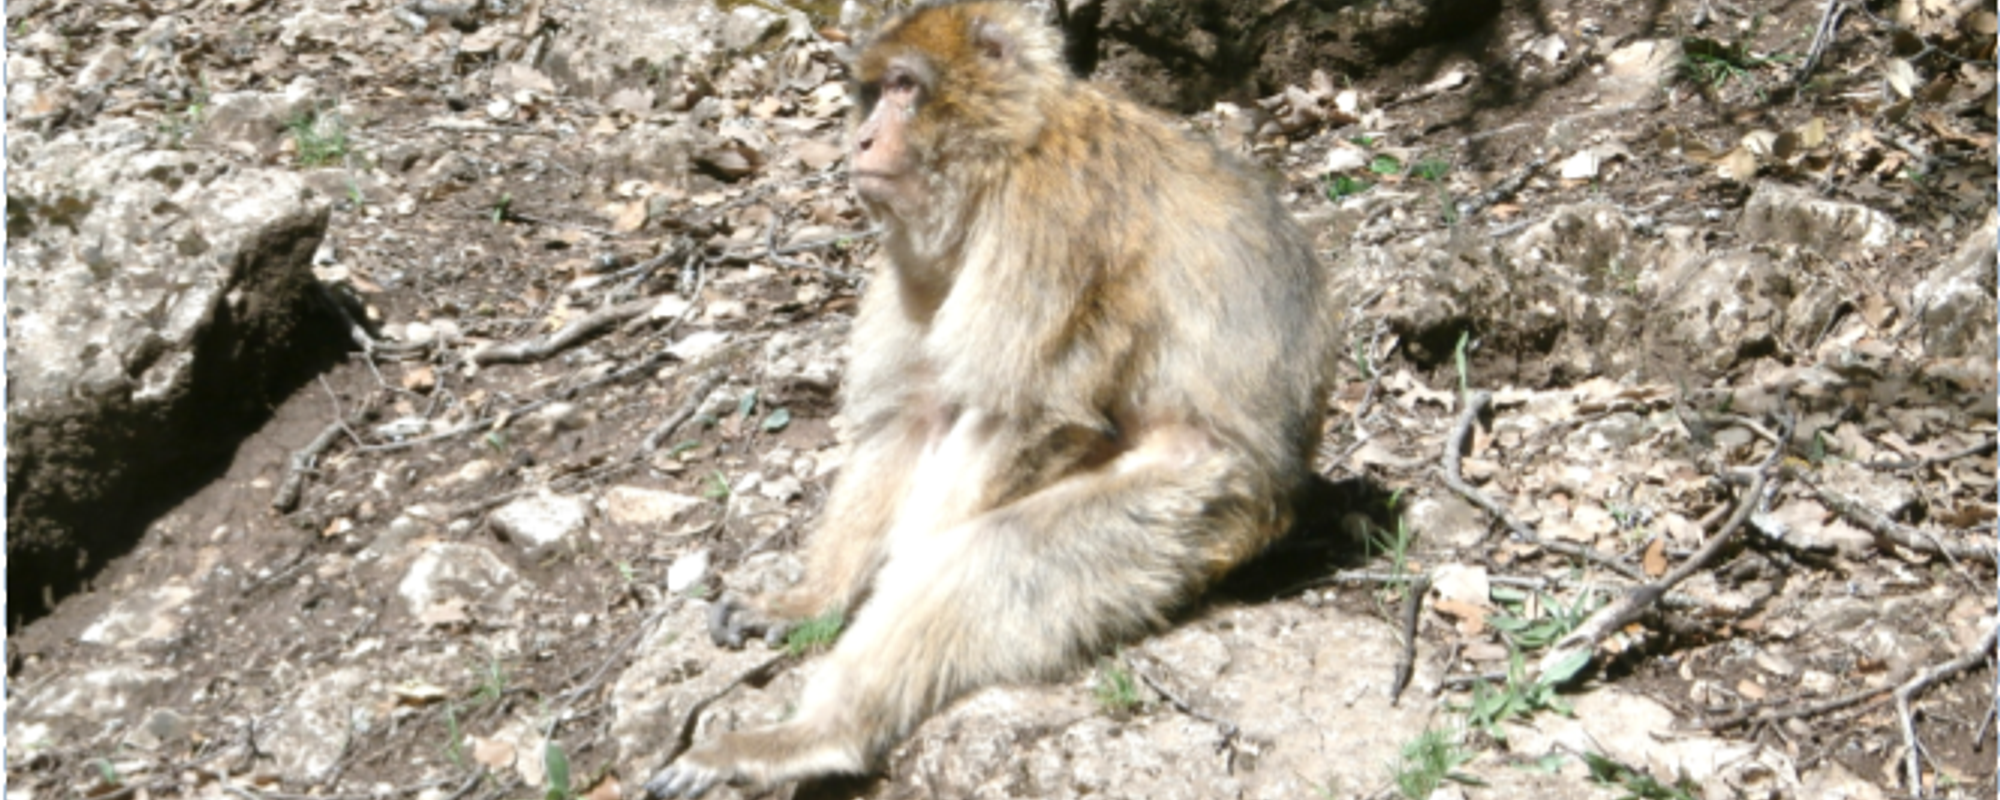 Our Moroccan Monkey Encounter in the Mid-Atlas Mountains